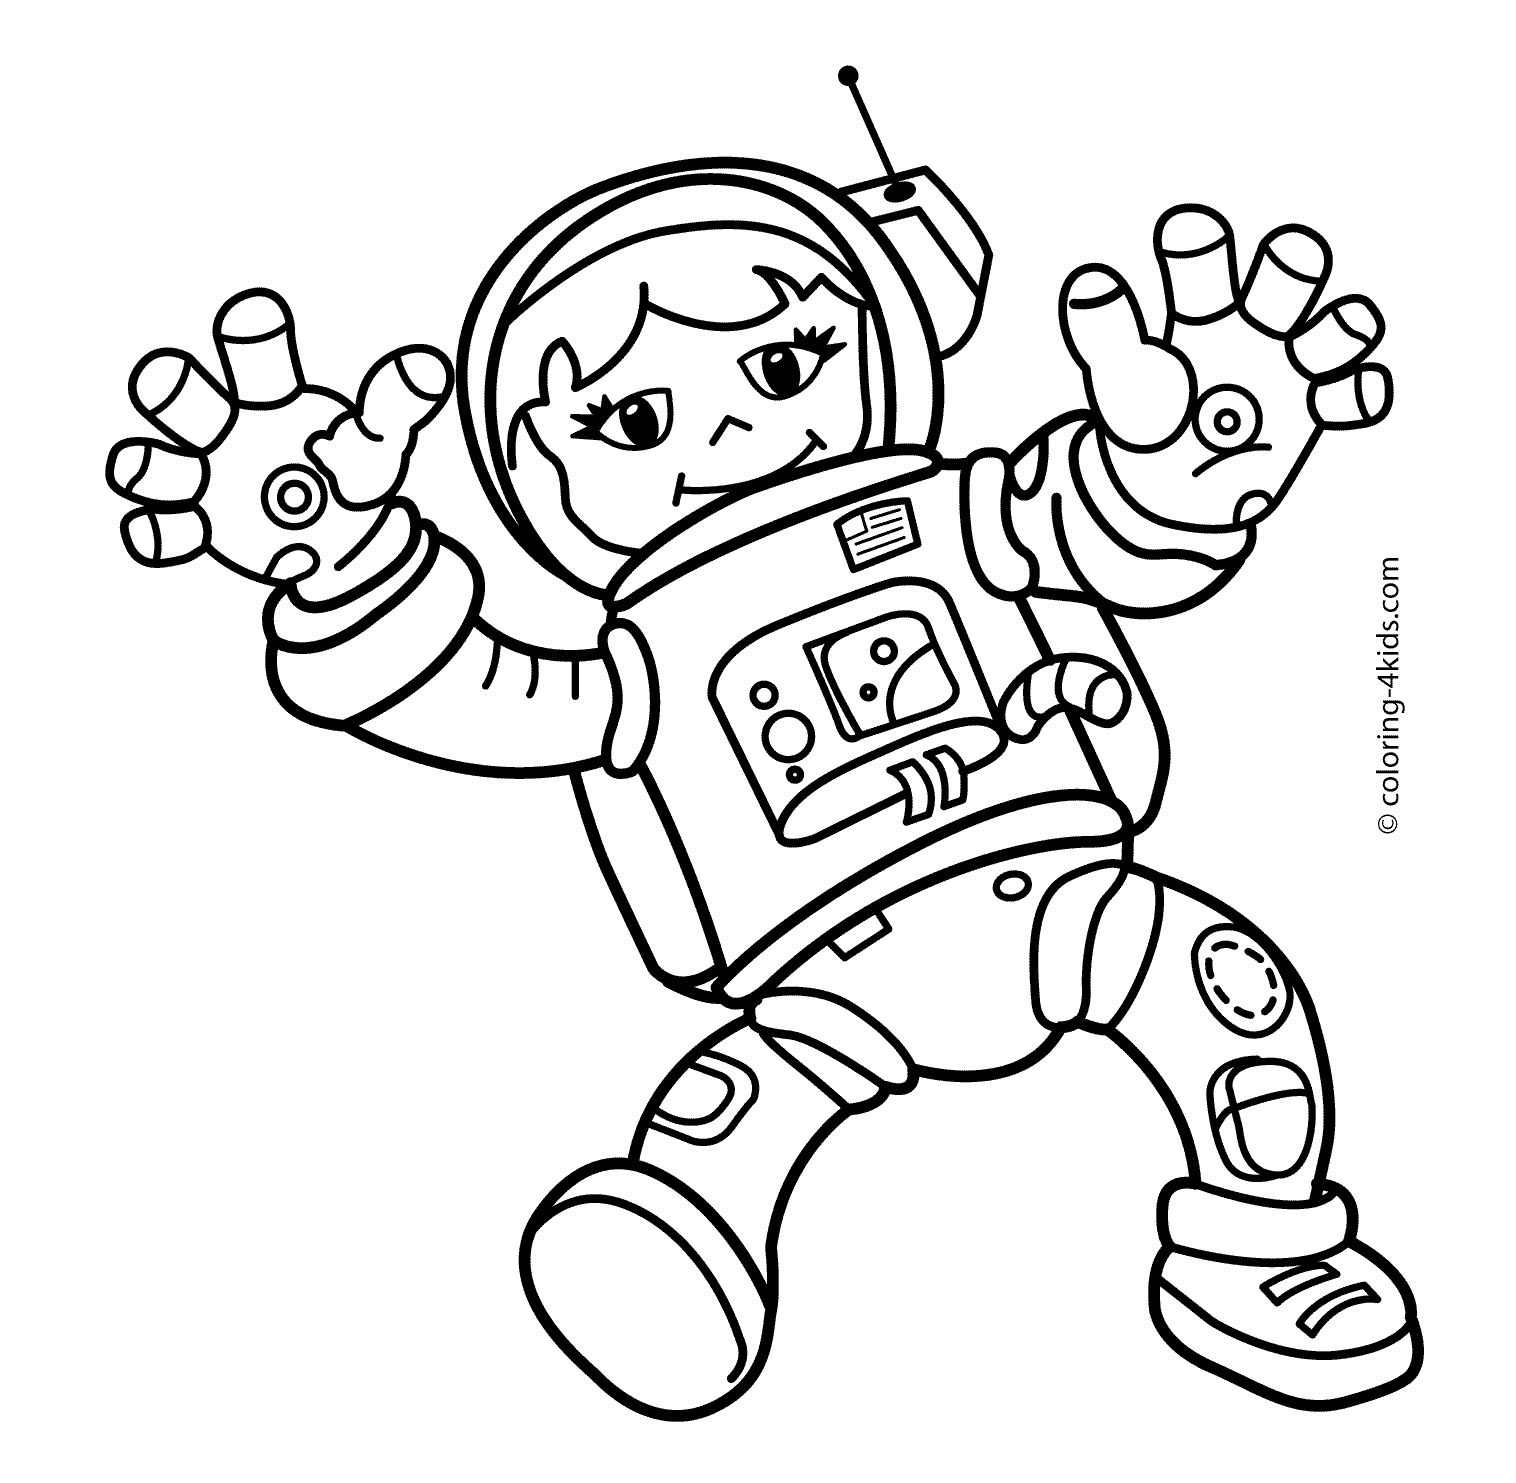 Related Astronaut Coloring Pages item-3185, Astronaut Coloring ...